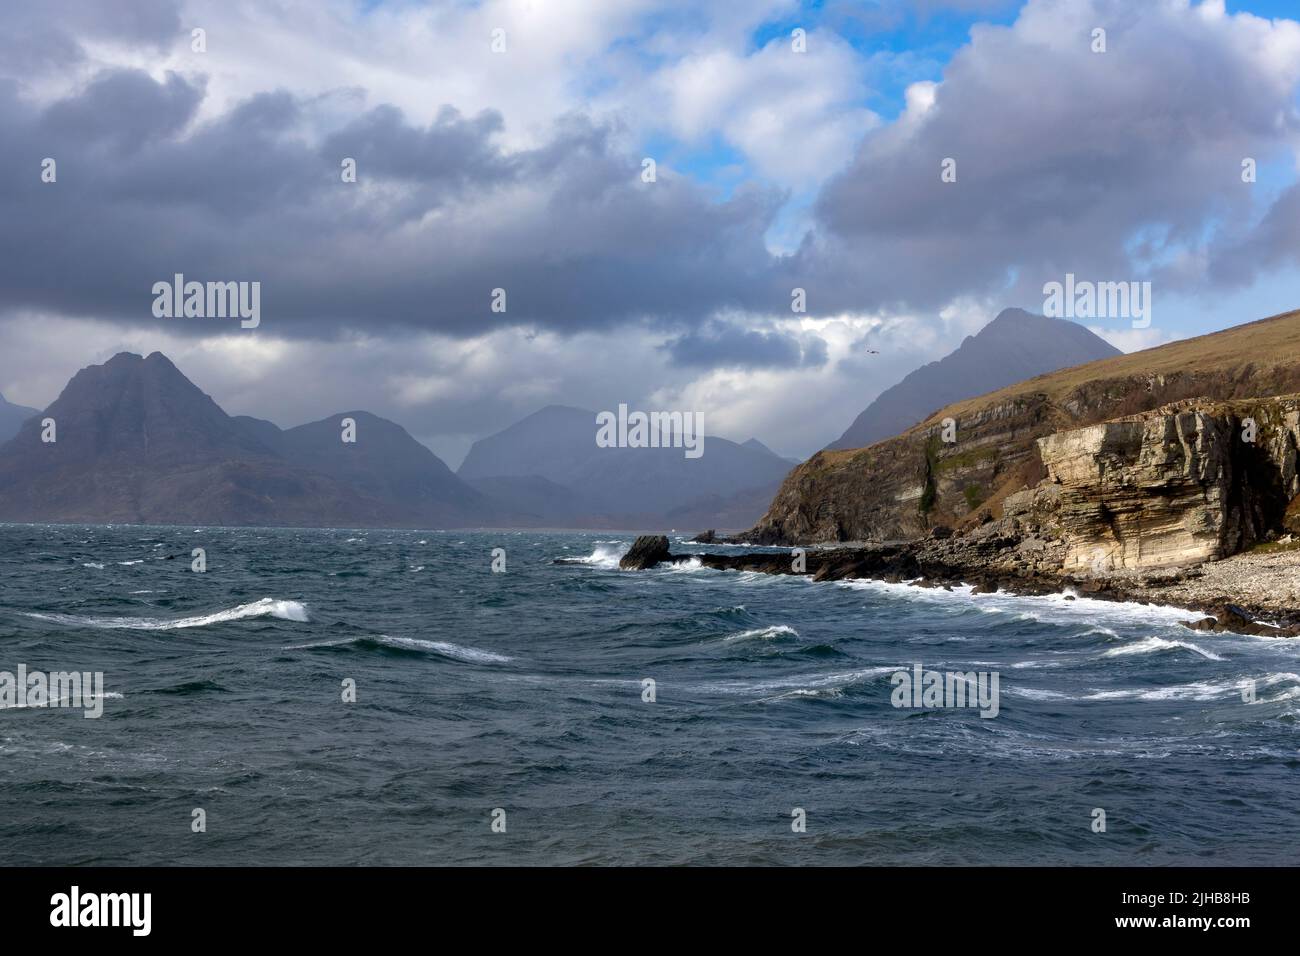 The View from Elgol across Loch Scavaig towards the Cuillins Mountains, Isle of Skye, Scotland Stock Photo